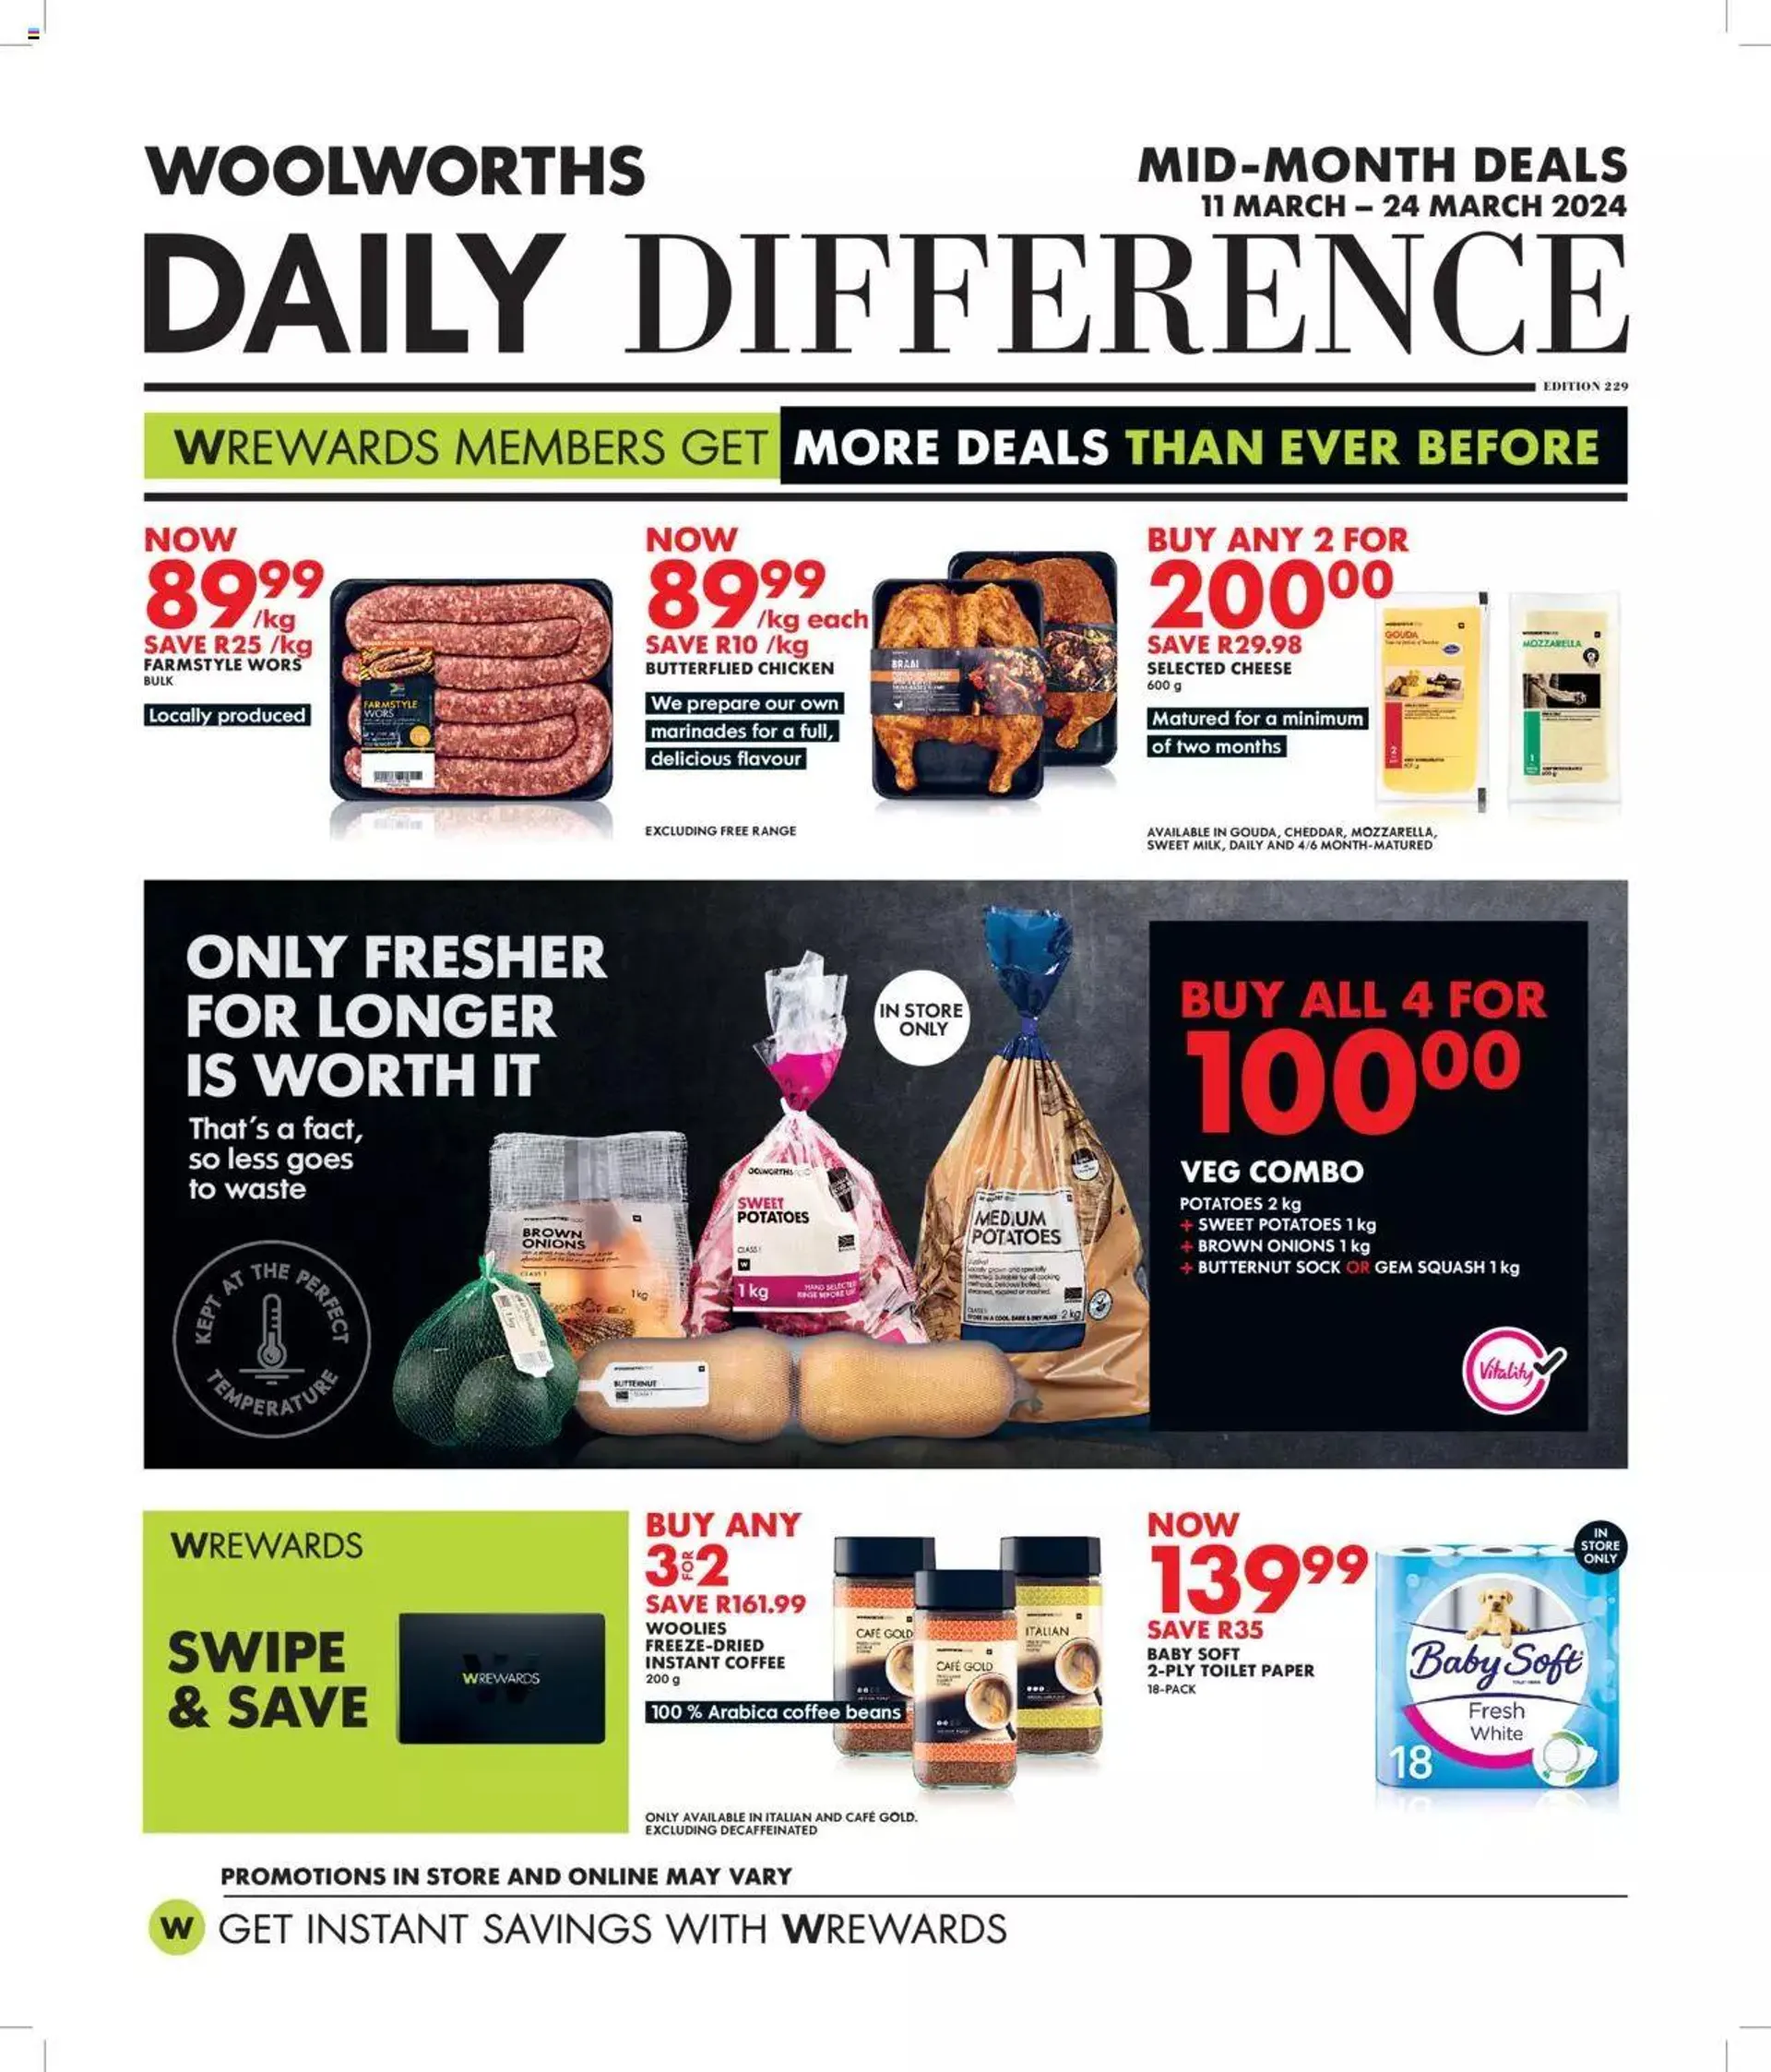 Woolworths Daily Difference - Gauteng - 11 March 24 March 2024